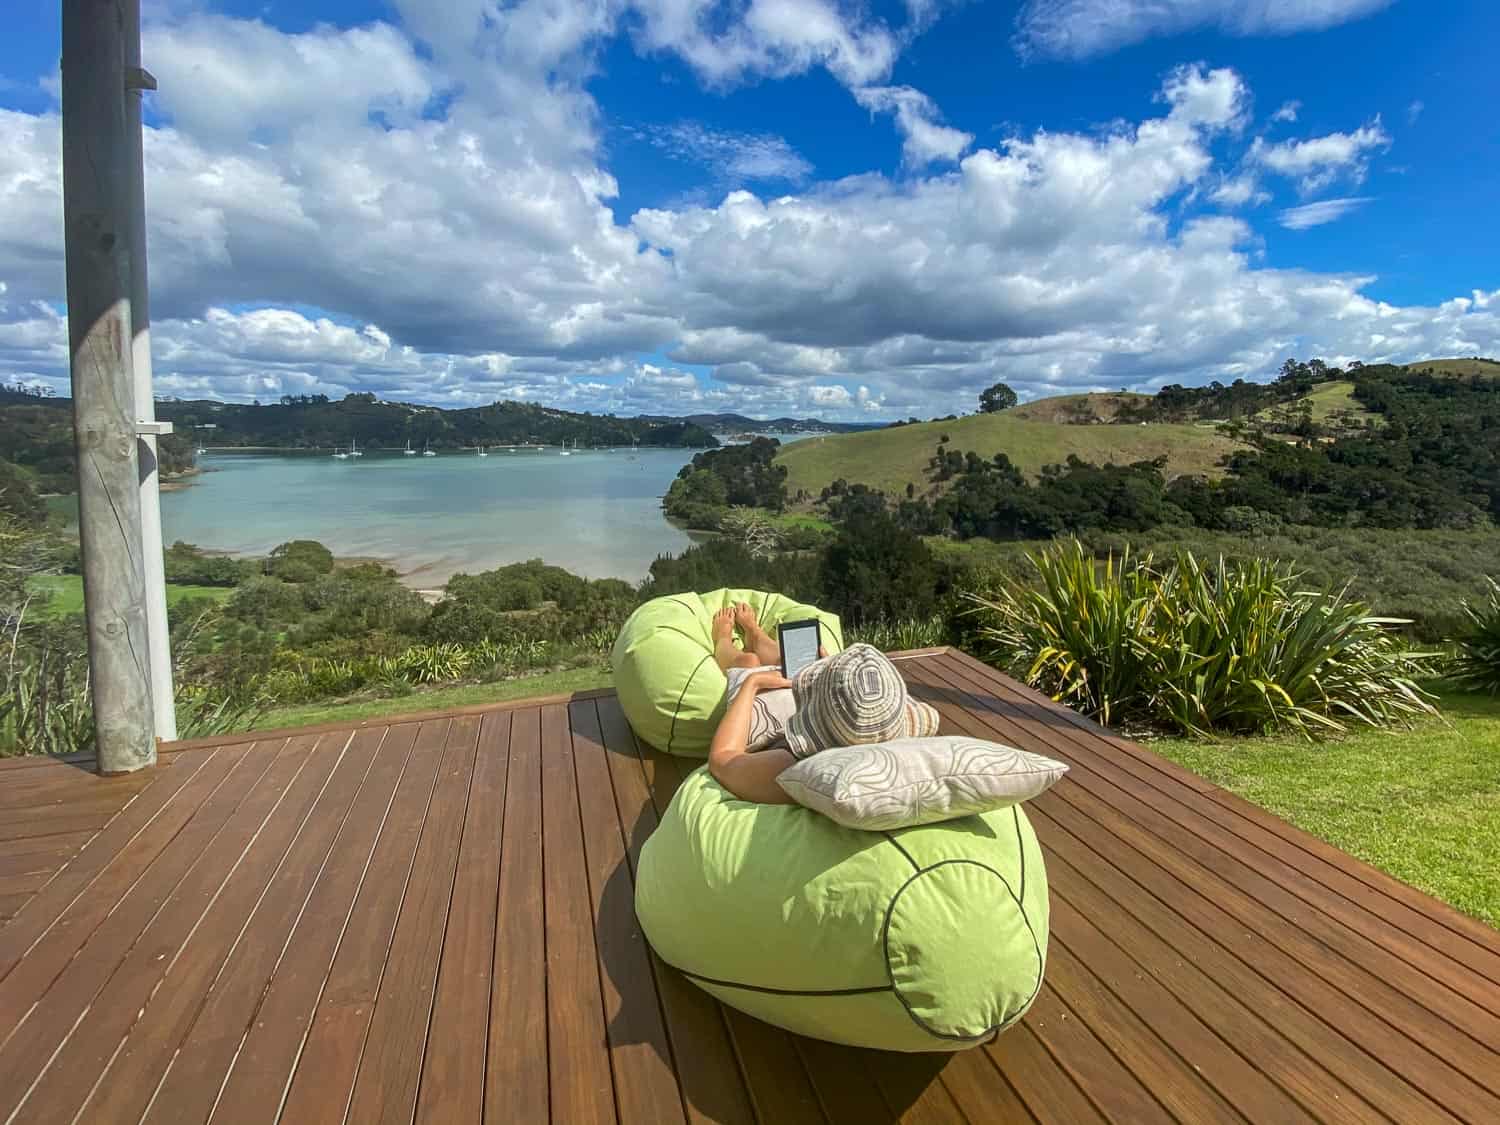 Relaxing in a beanbag on the terrace of our Russell Airbnb during my lockdown birthday